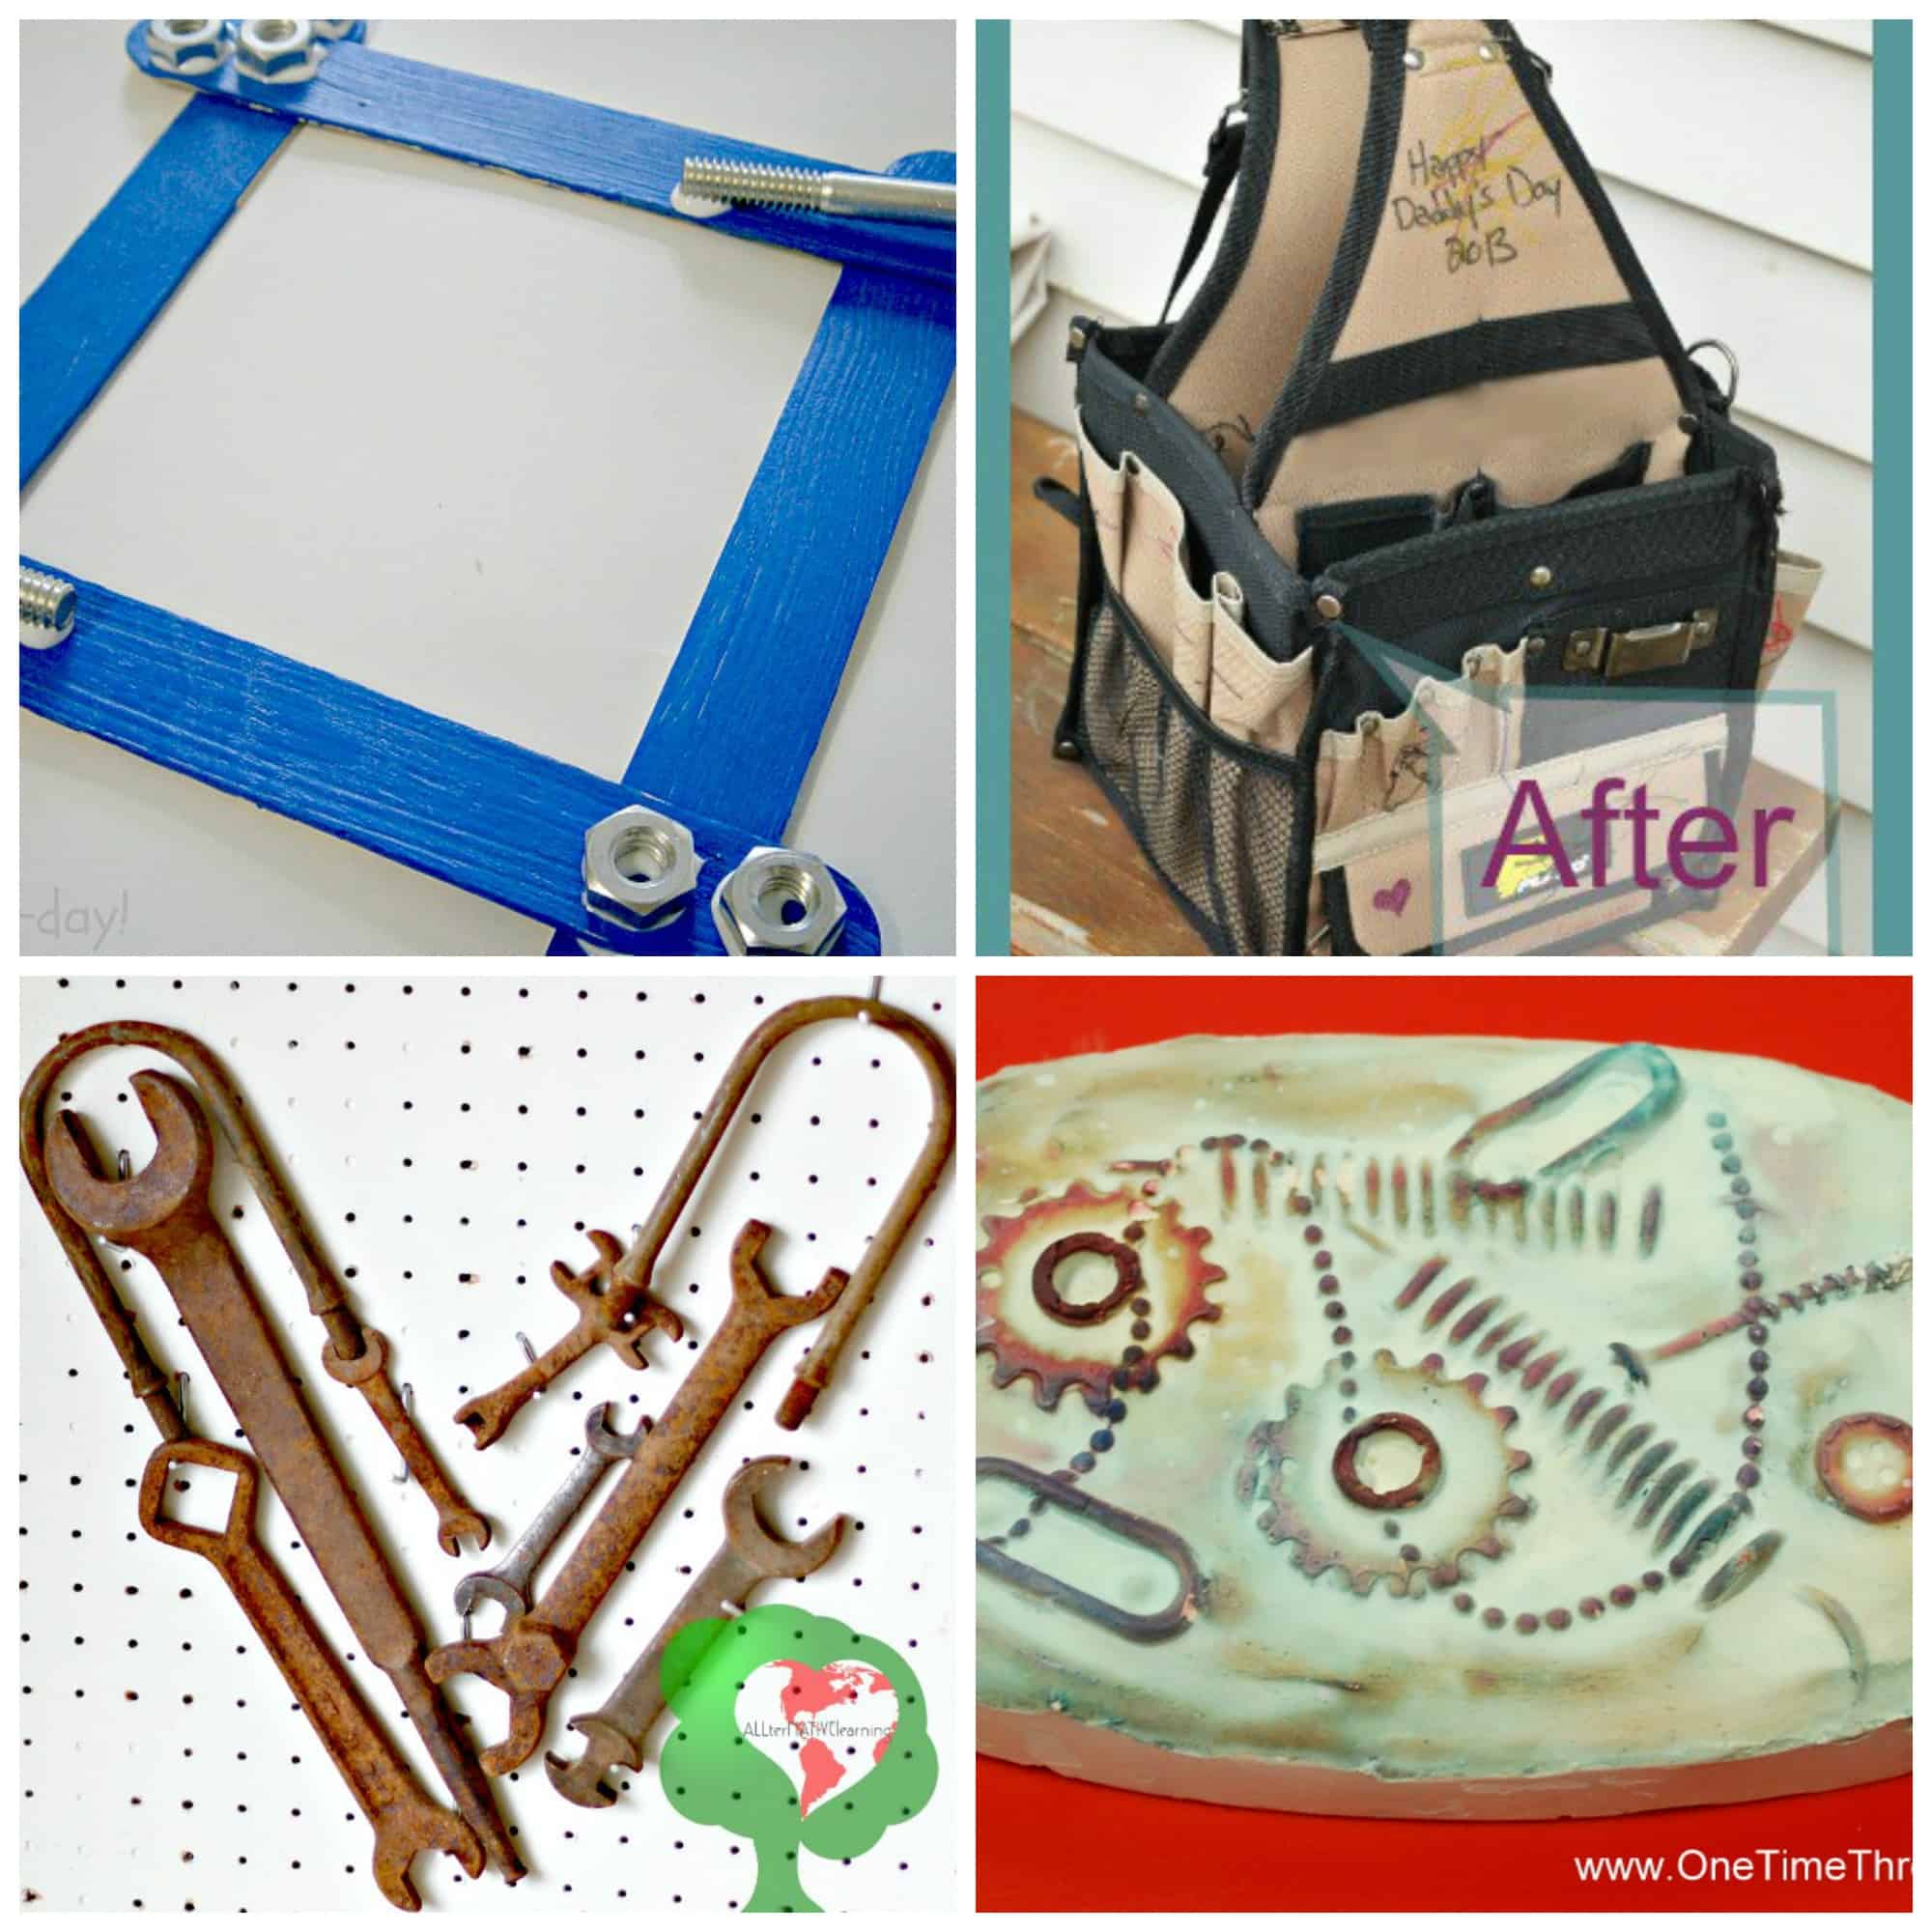 These father's day gifts are perfect for the tool lover! For the dad who has everything, they appreciate a homemade gift from their kids. These can all be kid made and are sure to warm the heart of any dad this father's day!